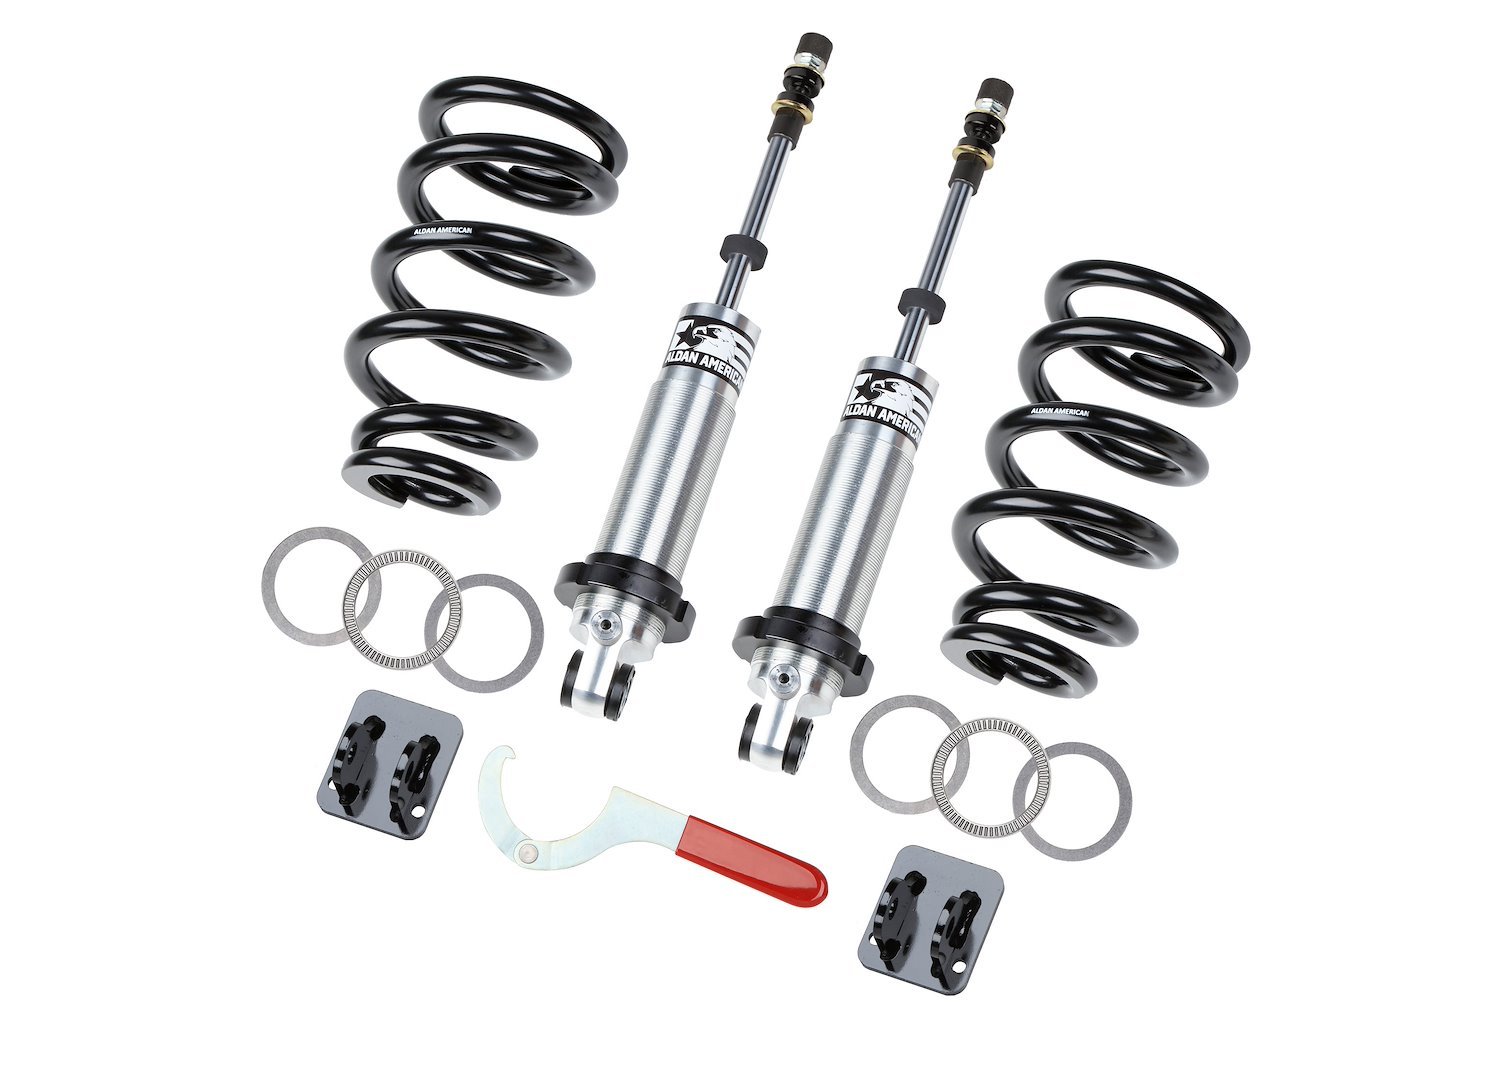 RCX-Series Front Coil-Over Kit 1999-2006 GM 1500 Pickup Truck [Spring Rate: 800 lbs./in.]